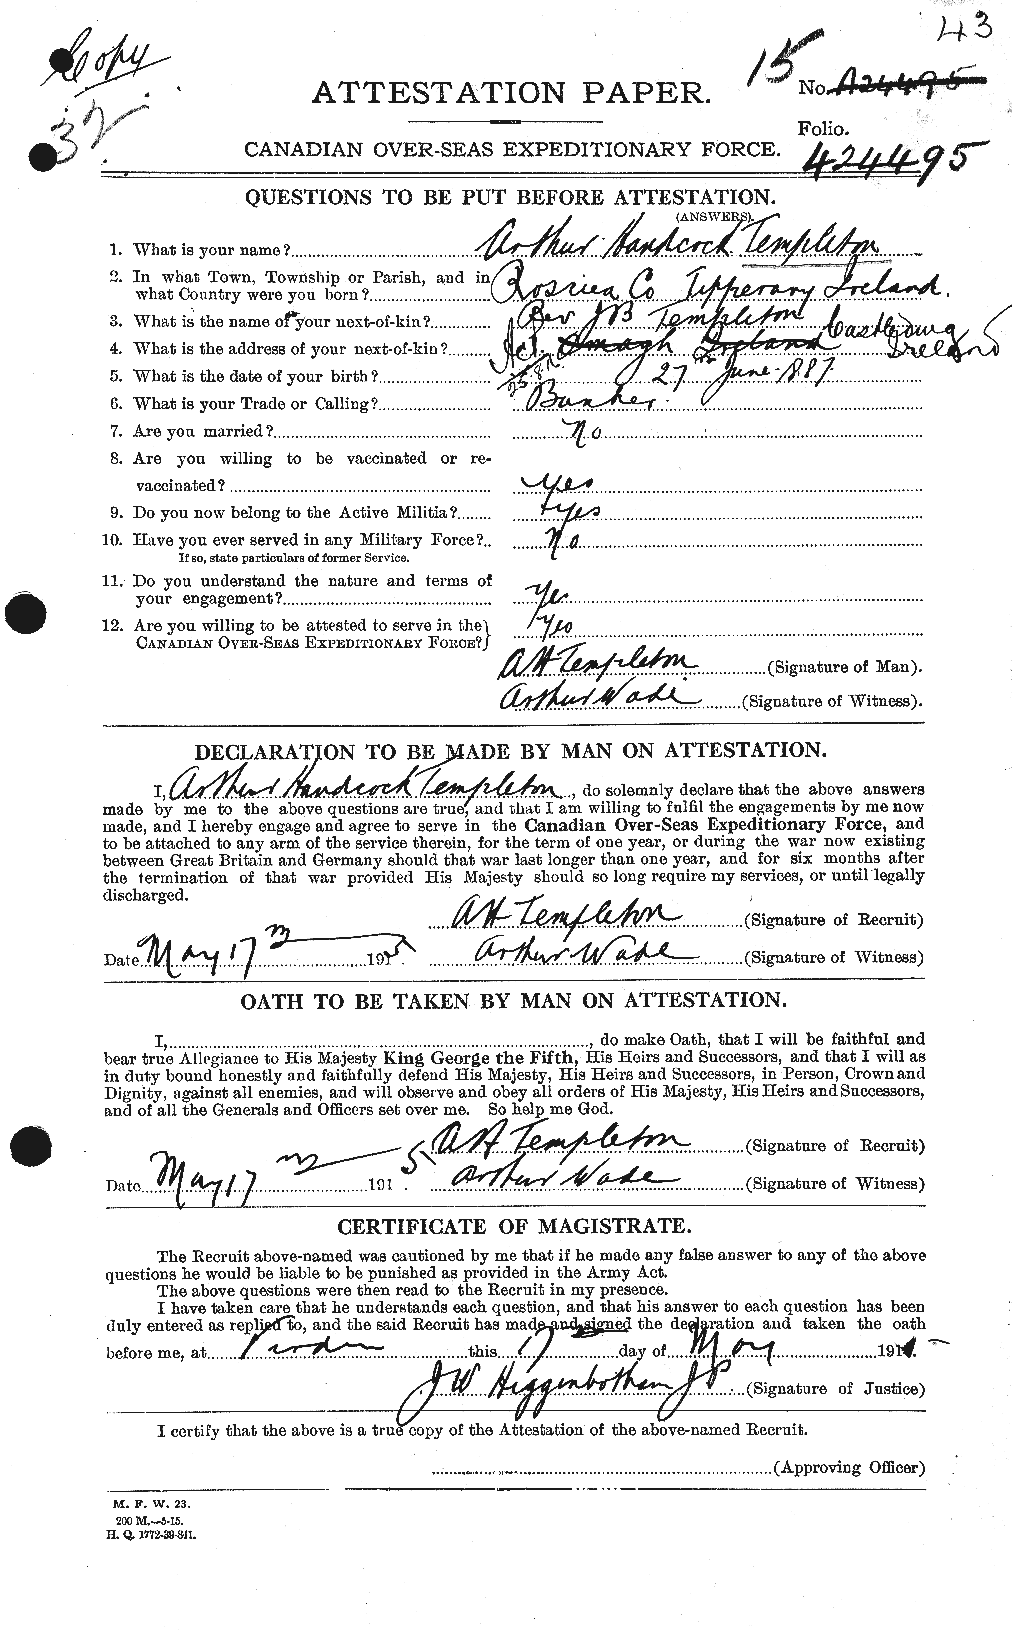 Personnel Records of the First World War - CEF 629145a